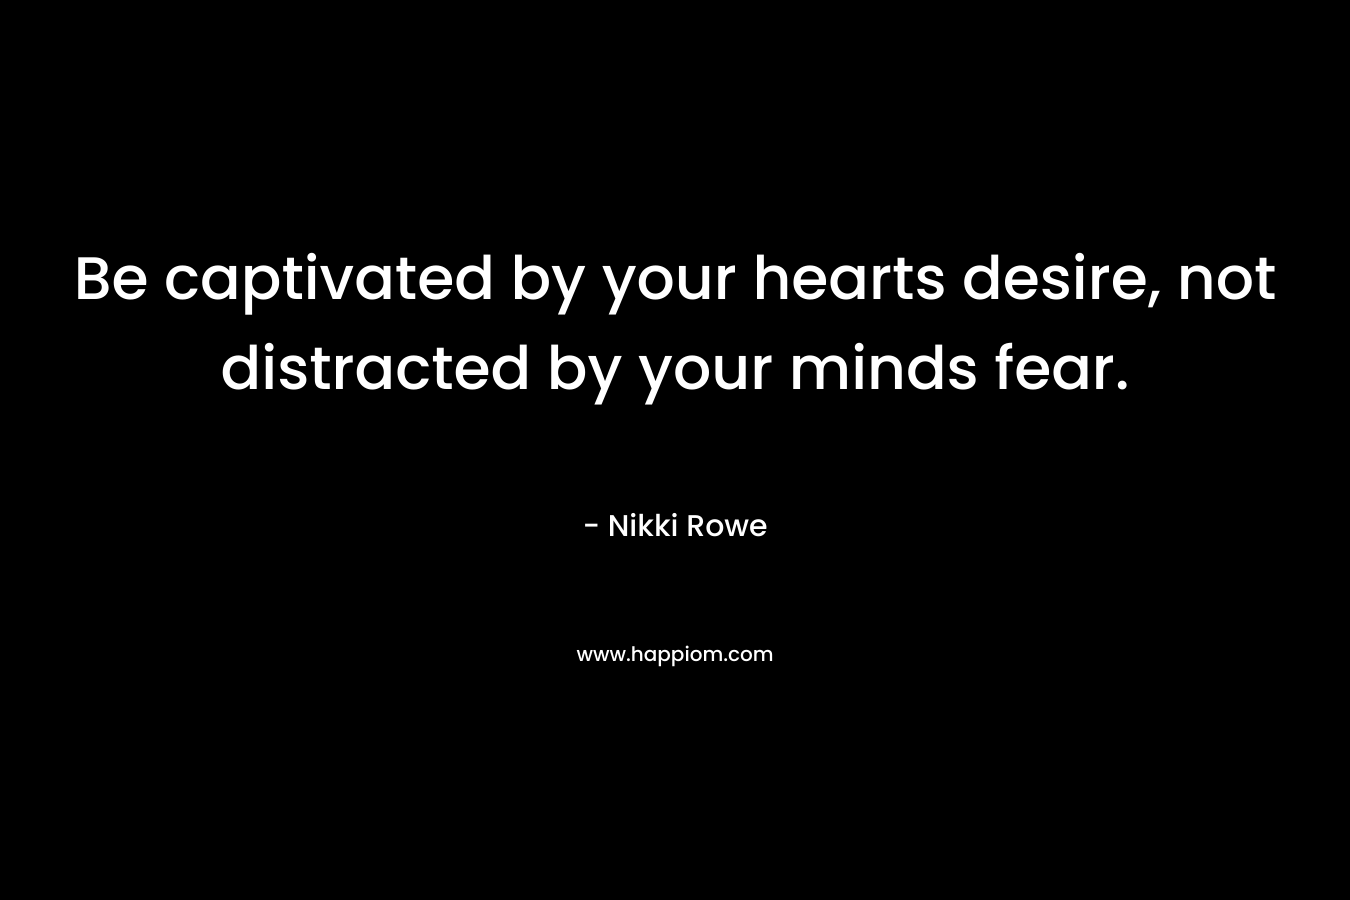 Be captivated by your hearts desire, not distracted by your minds fear.